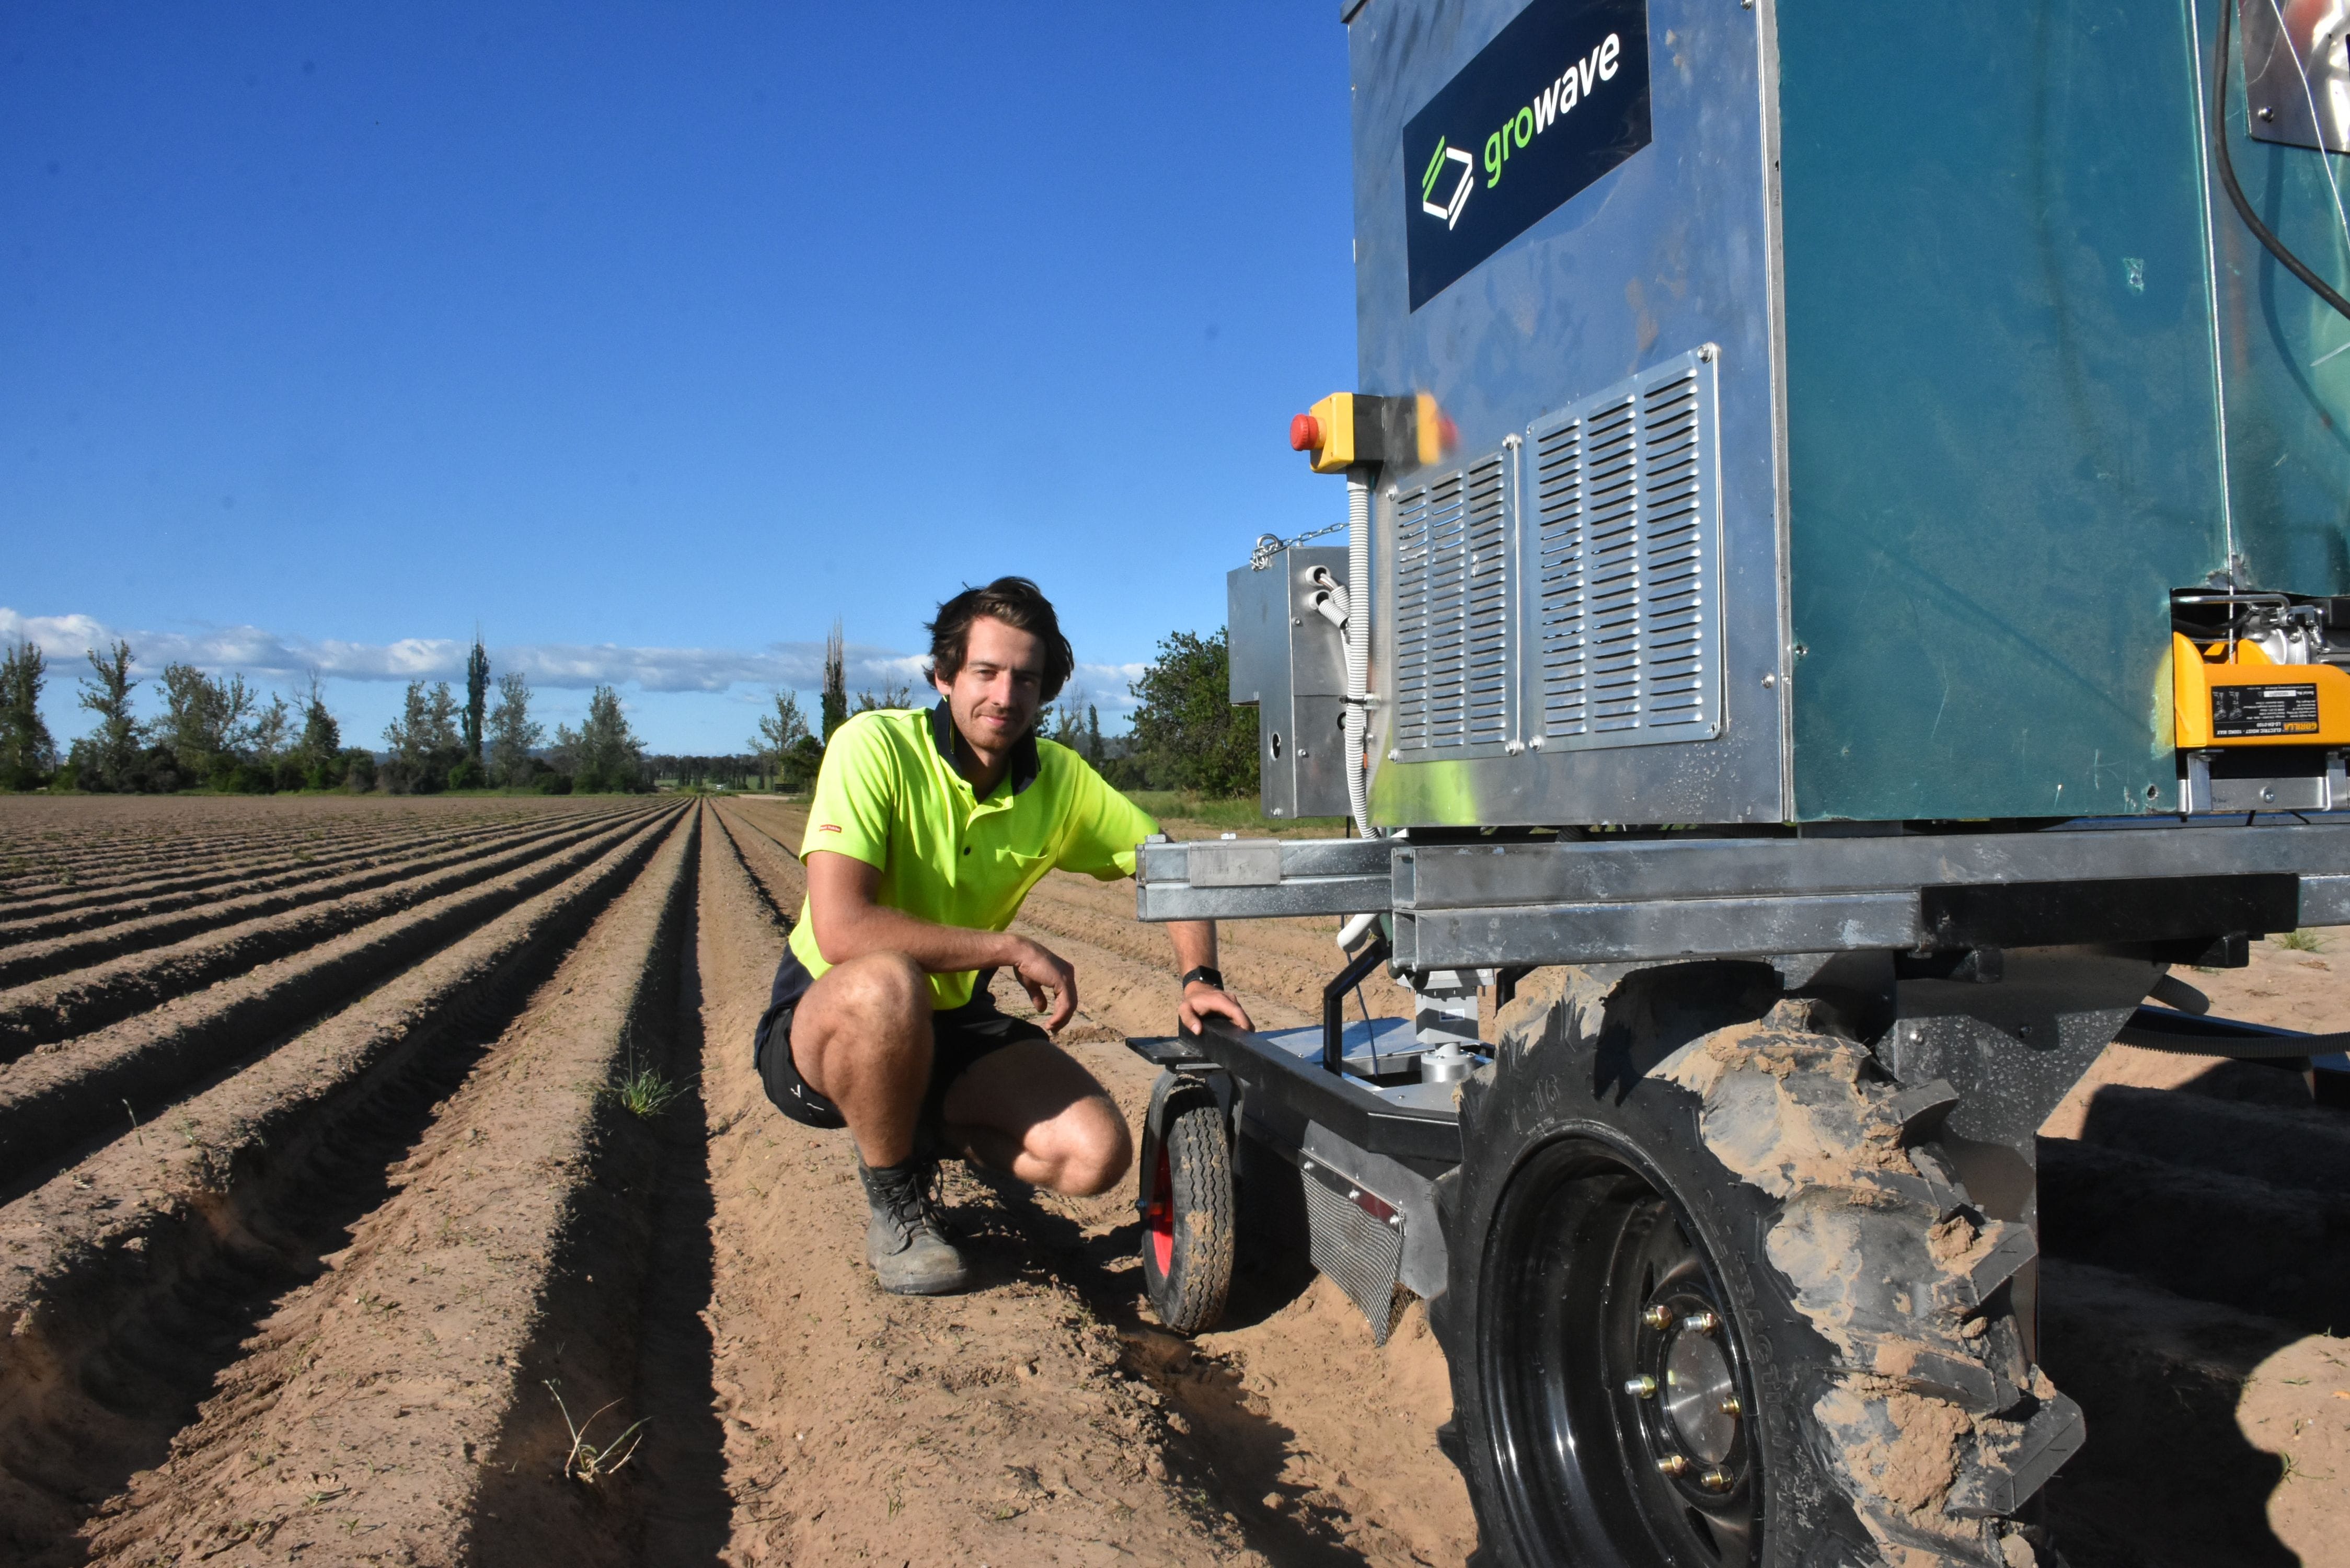 Growave to raise $5m for chemical-free weed control